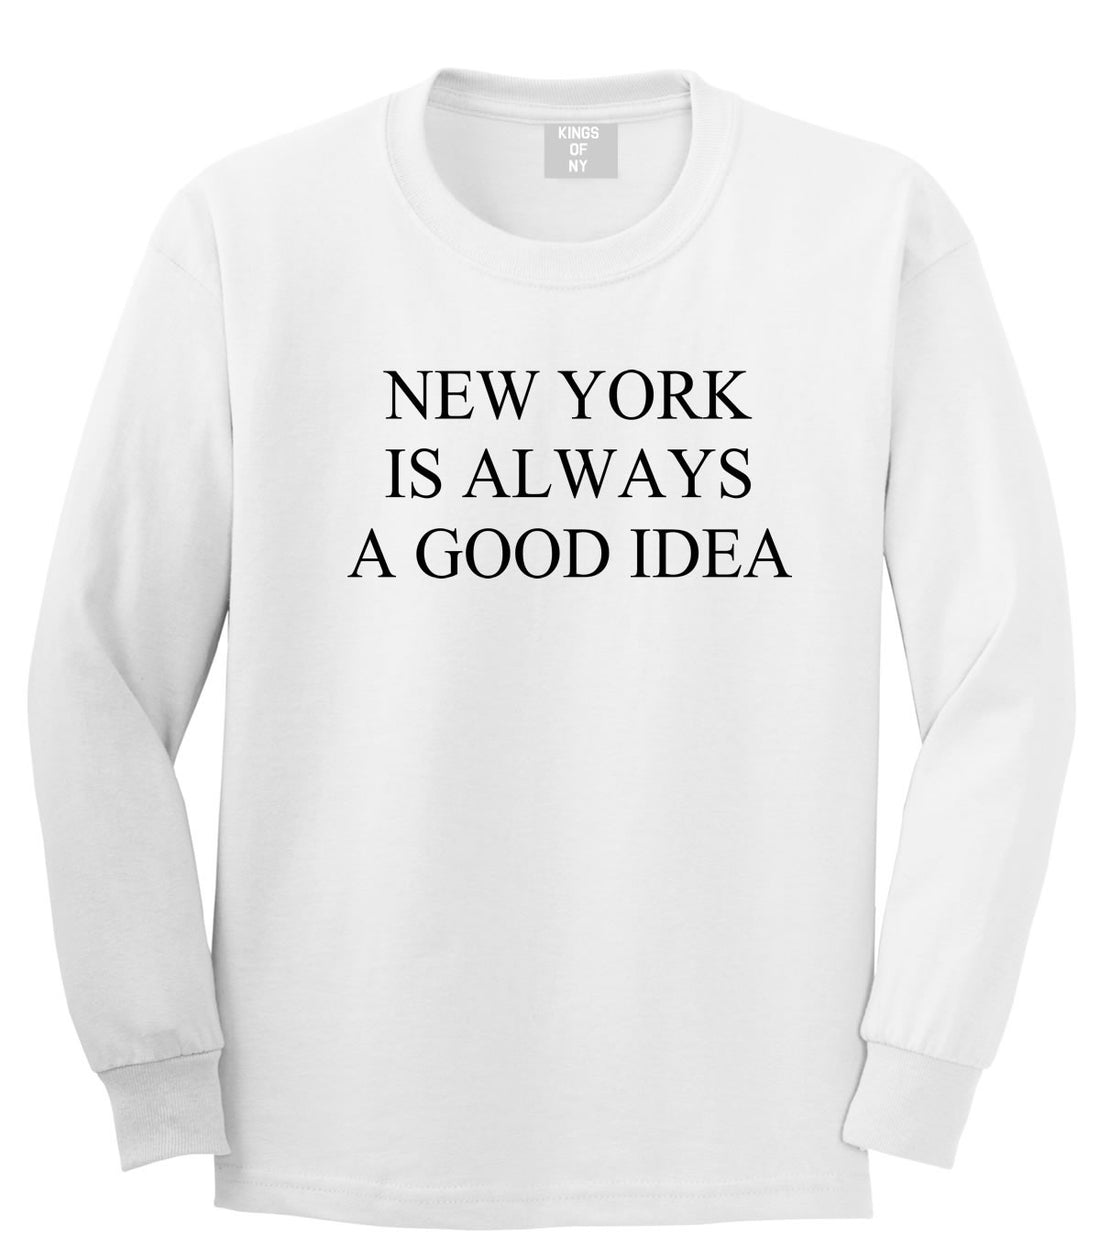 New York Is Always A Good Idea Long Sleeve T-Shirt in White by Kings Of NY